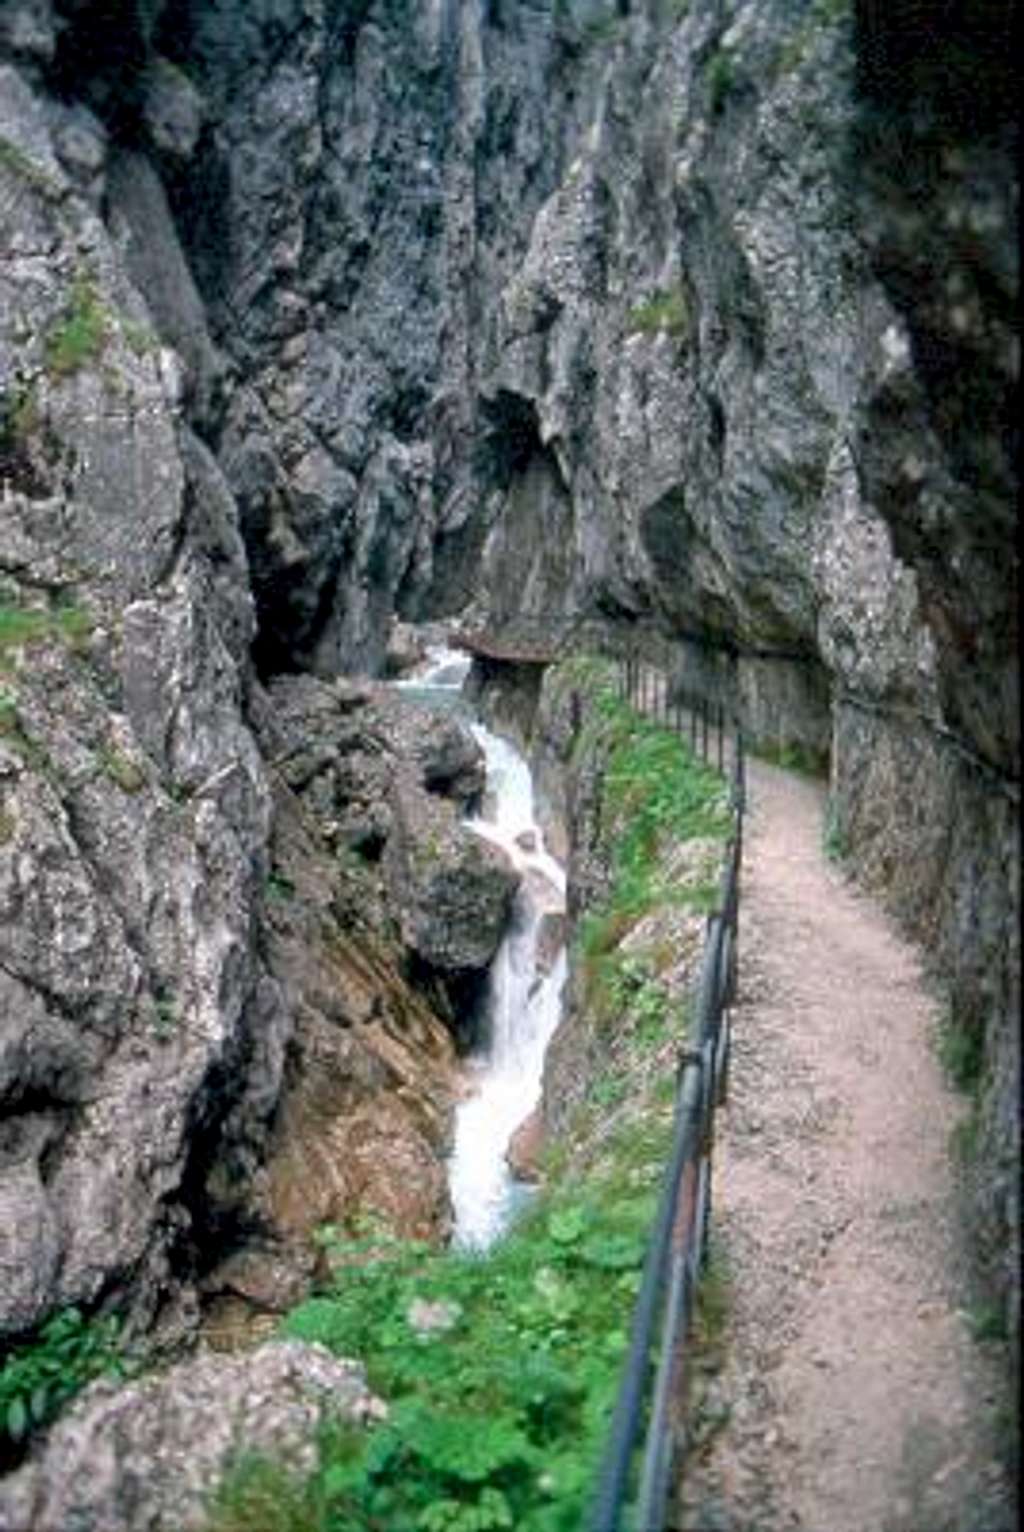 The Hoellental Gorge